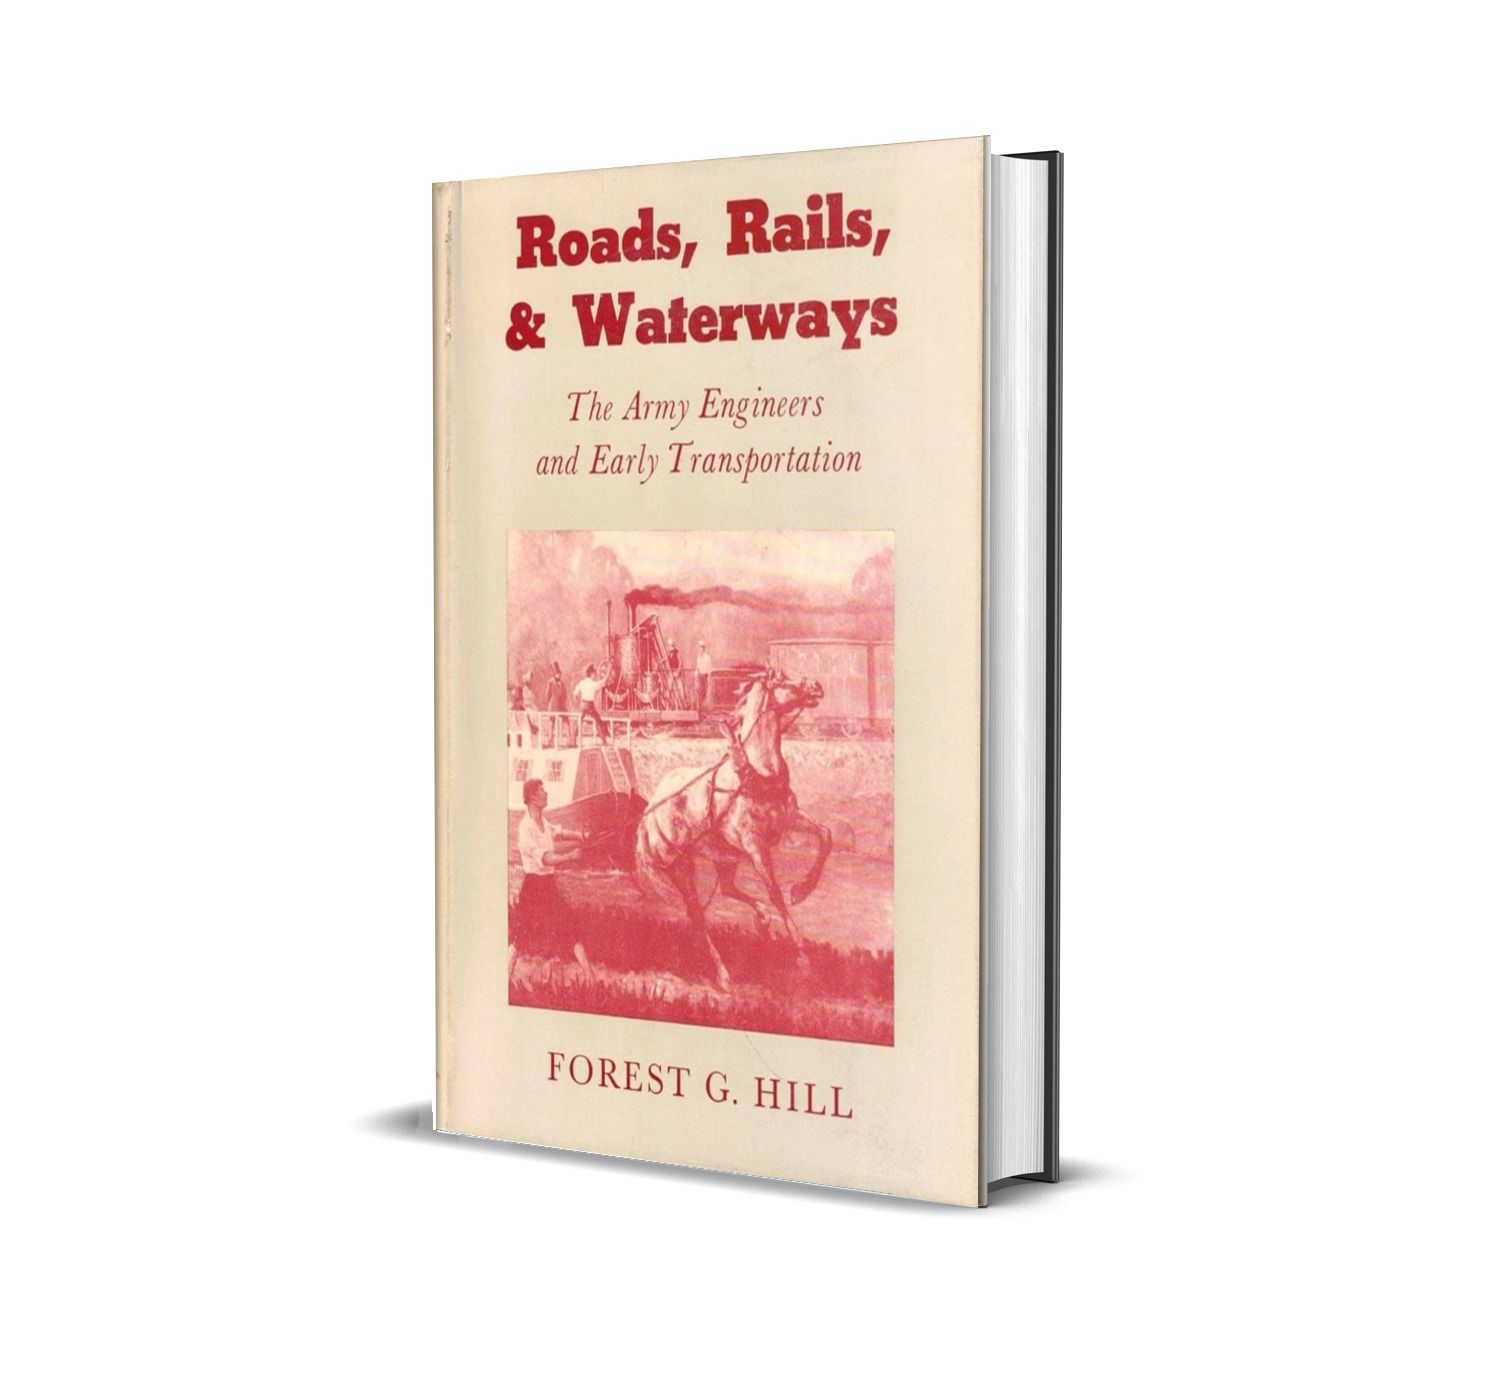 Roads, Rails, & Waterways: The Army Engineers and Early Transportation by Forest G. Hill